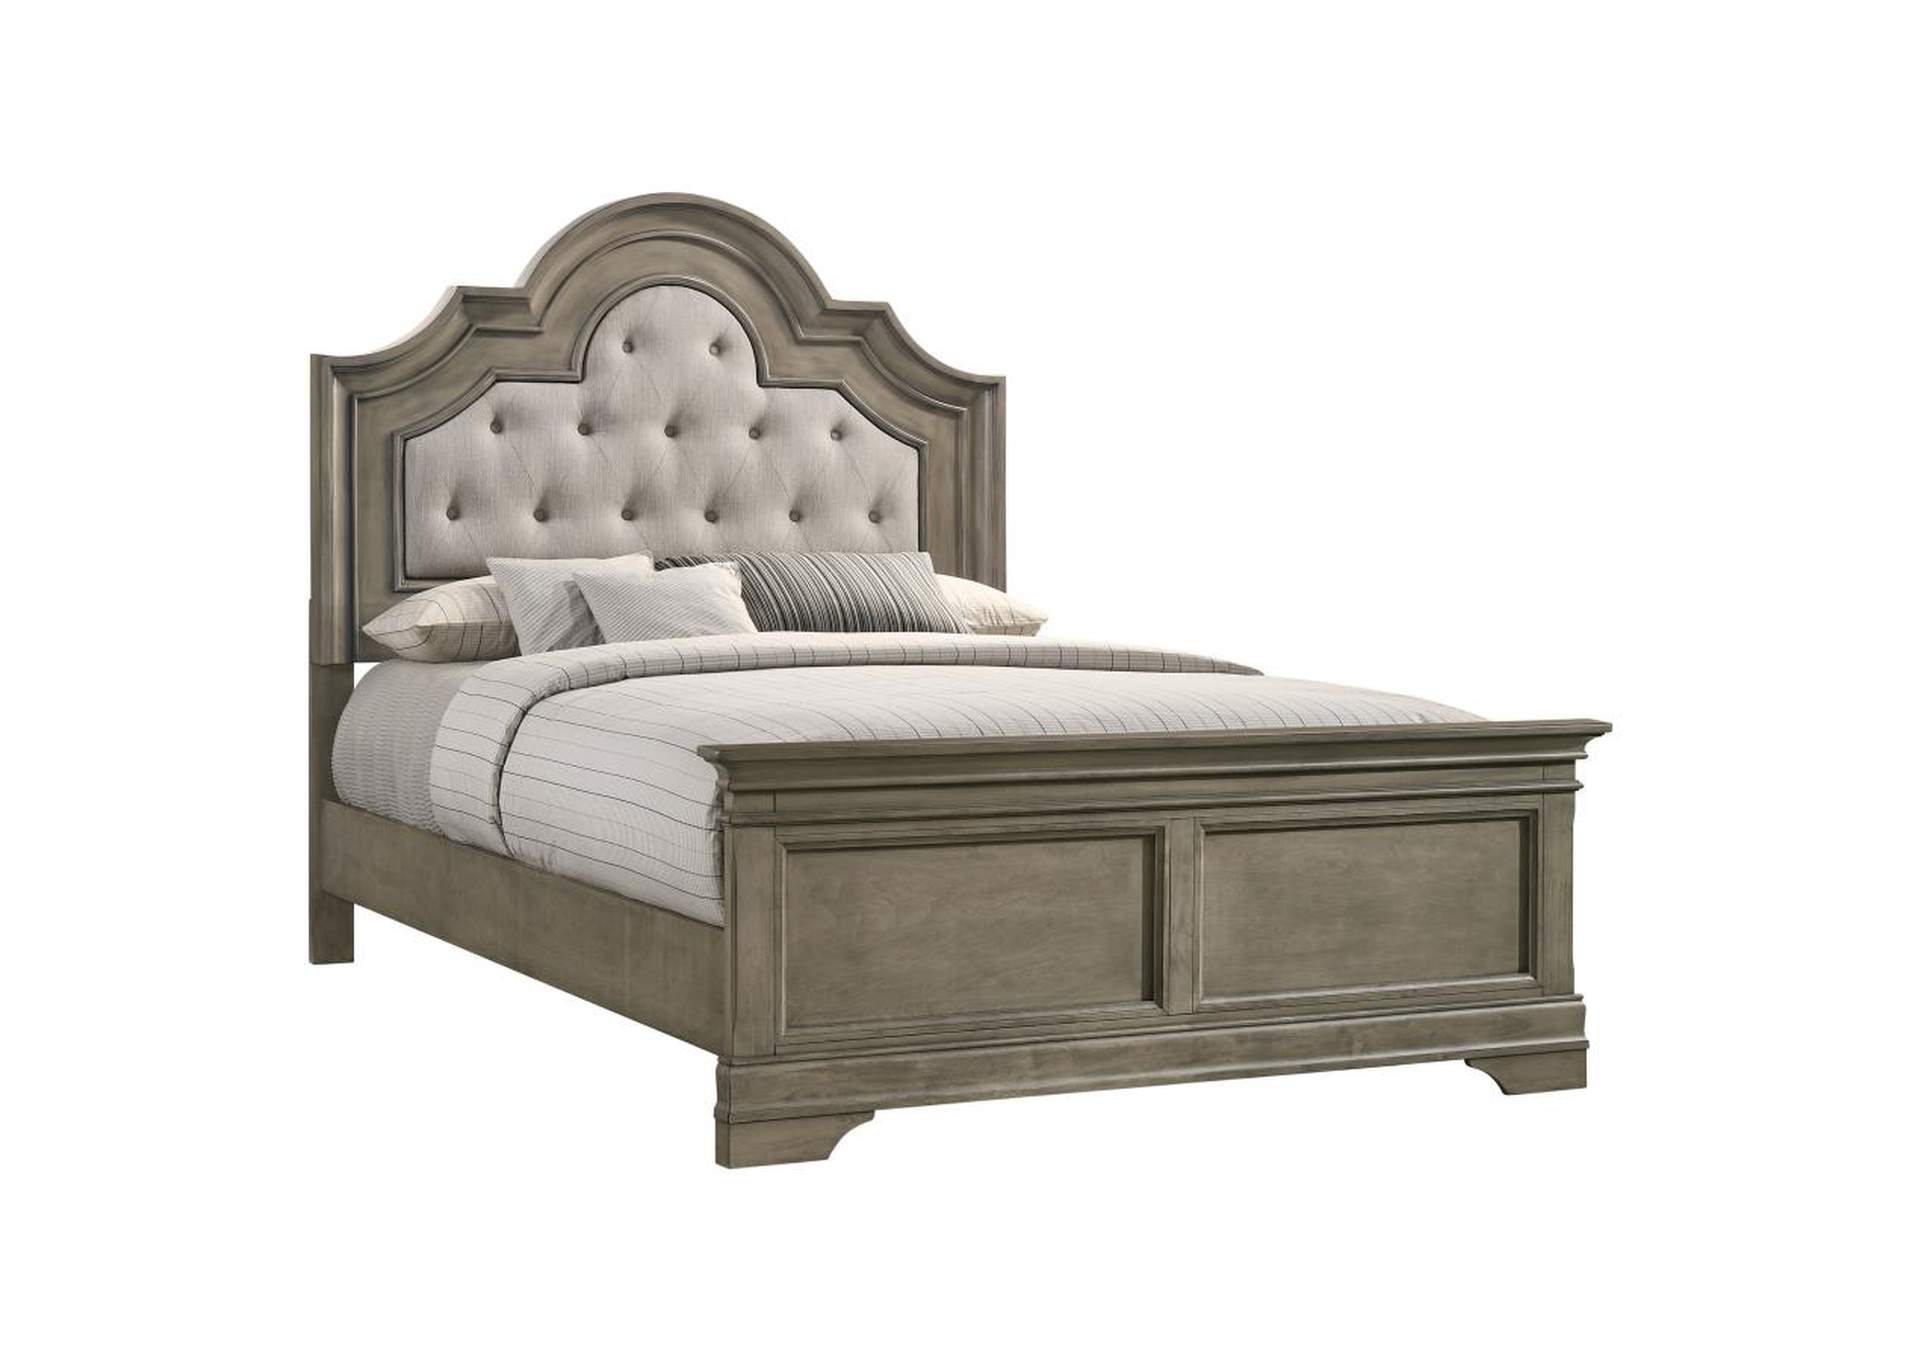 Manchester Bed With Upholstered Arched Headboard Beige And Wheat,Coaster Furniture